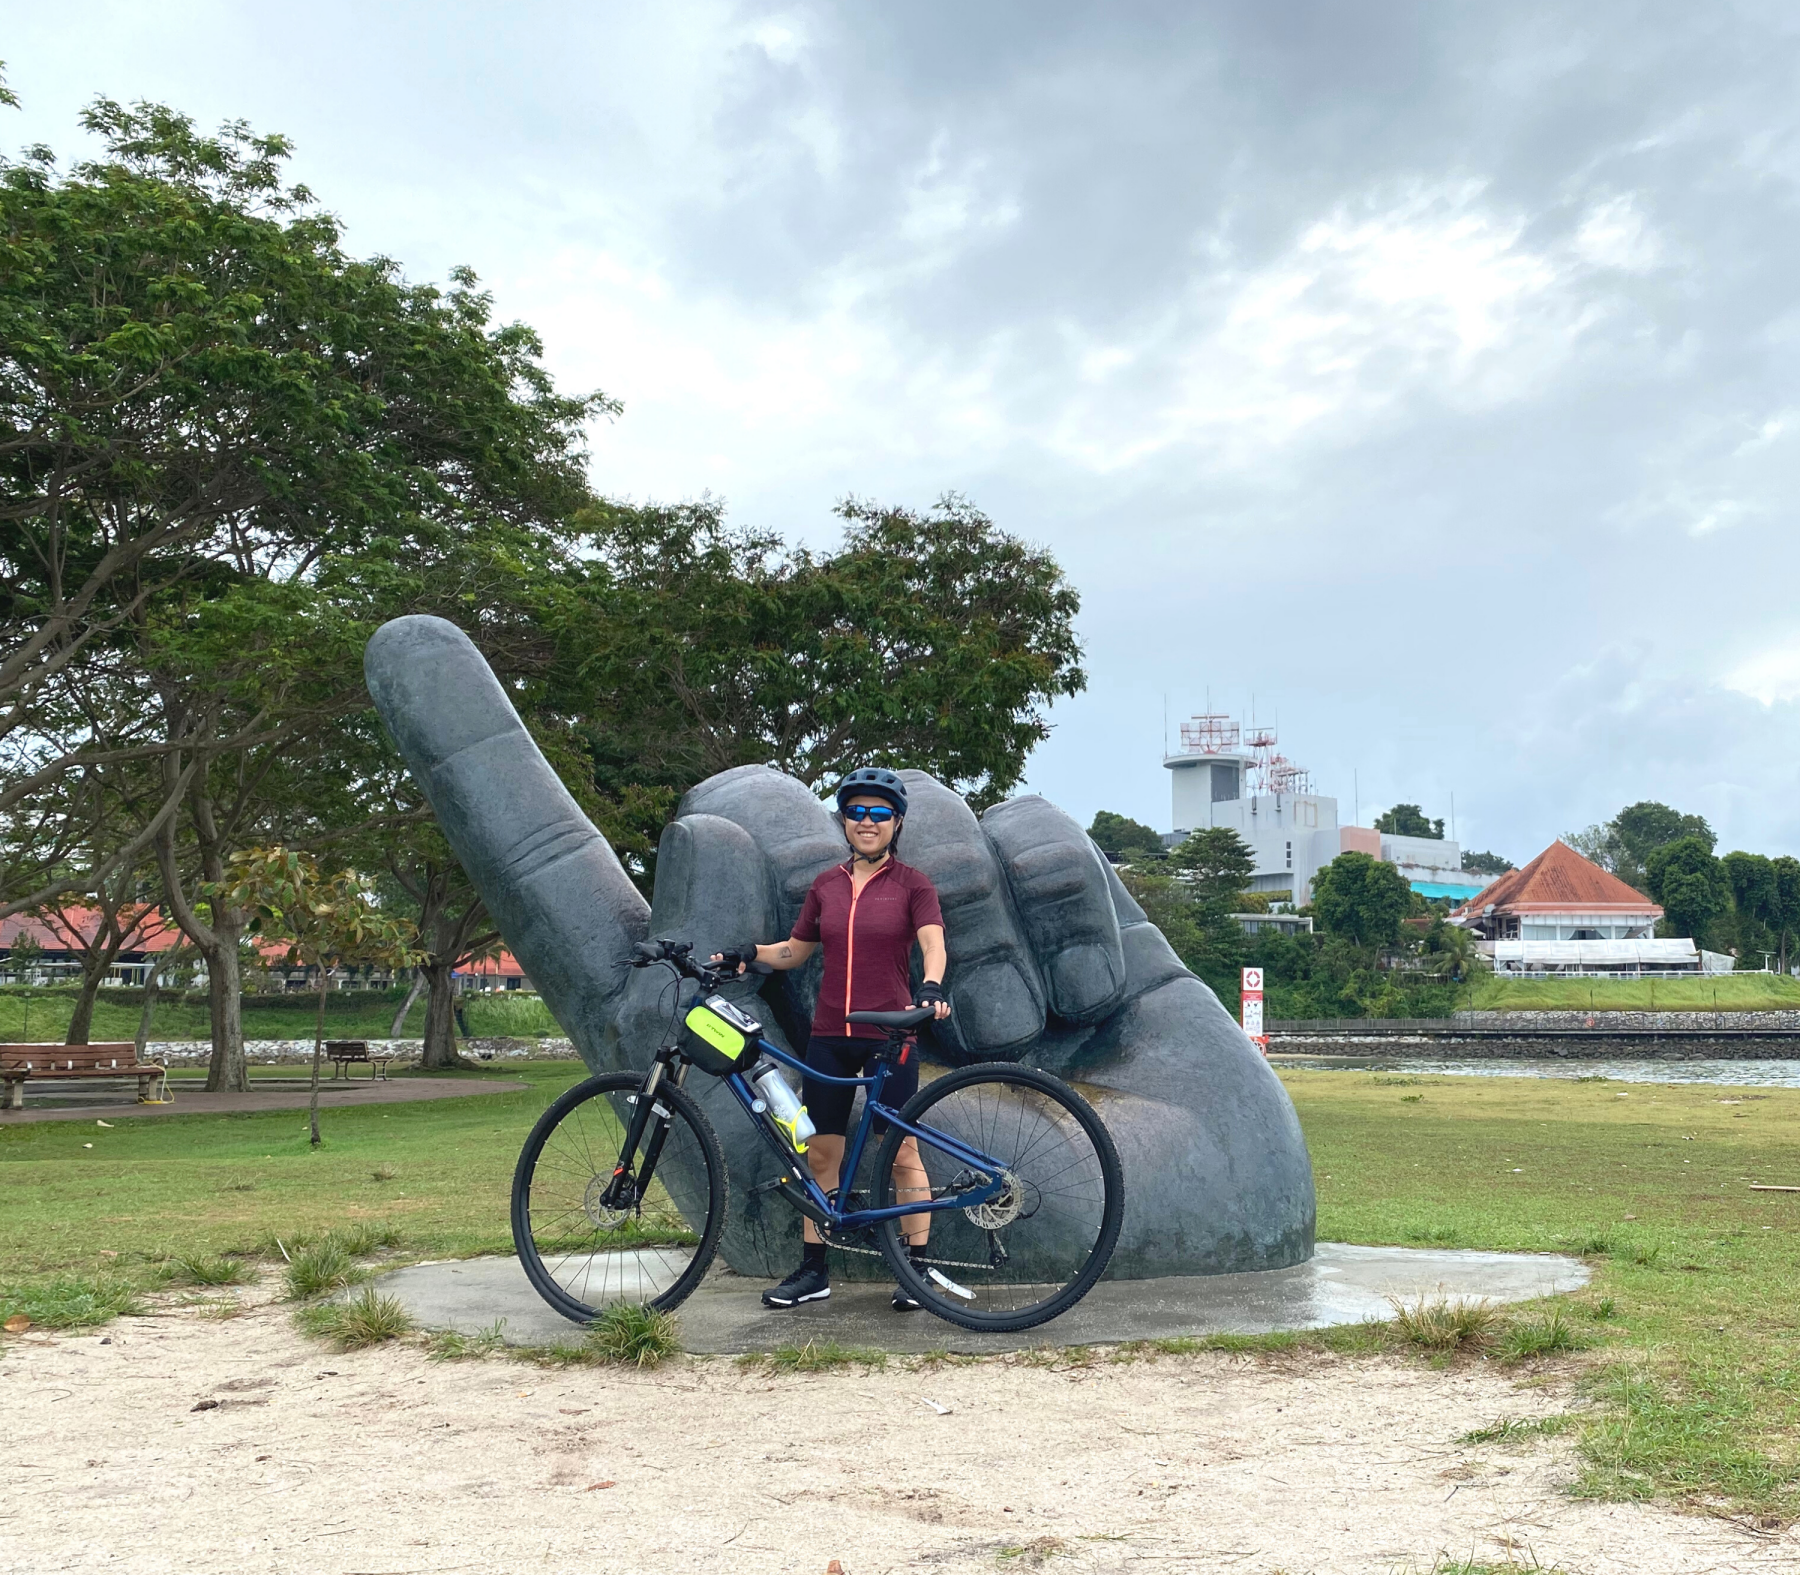 GUIDE TO SINGAPORE ROUND ISLAND CYCLING ROUTE